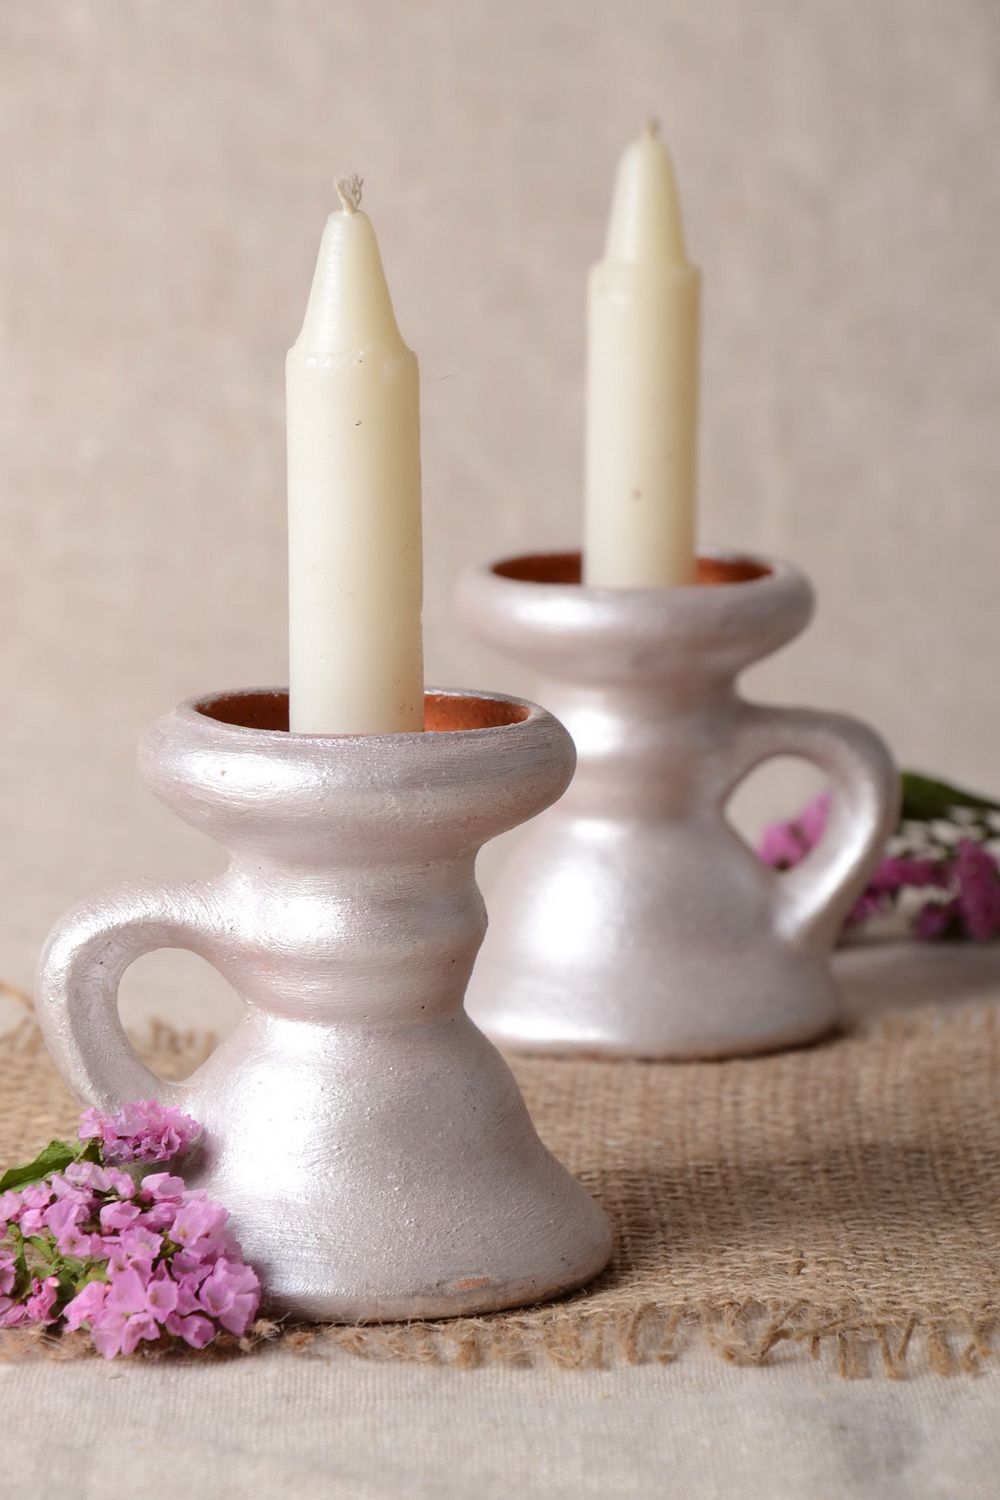 Set of 2 handmade painted clay candlesticks ceramic candle holders gift ideas photo 1